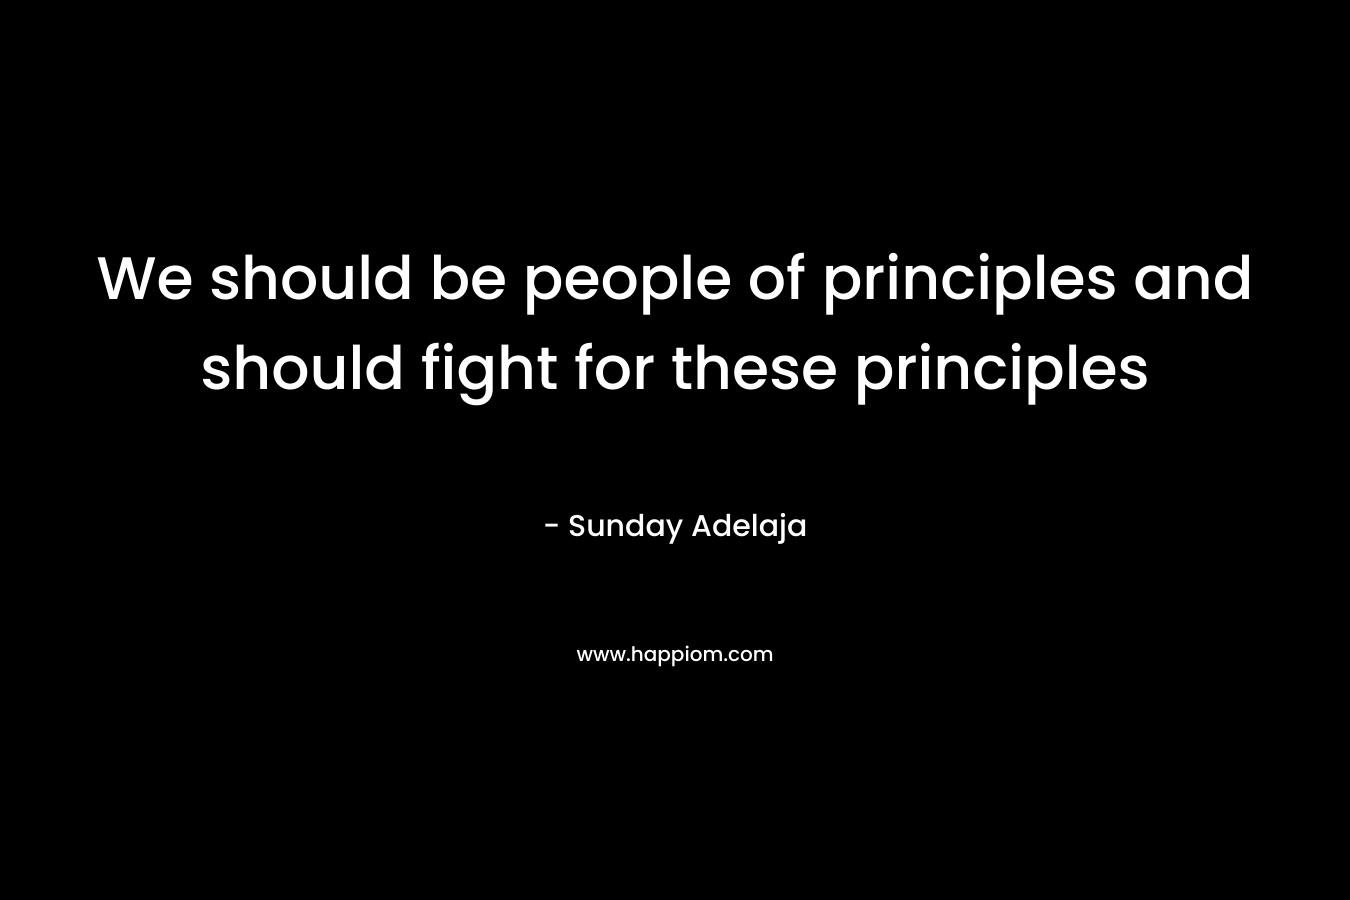 We should be people of principles and should fight for these principles